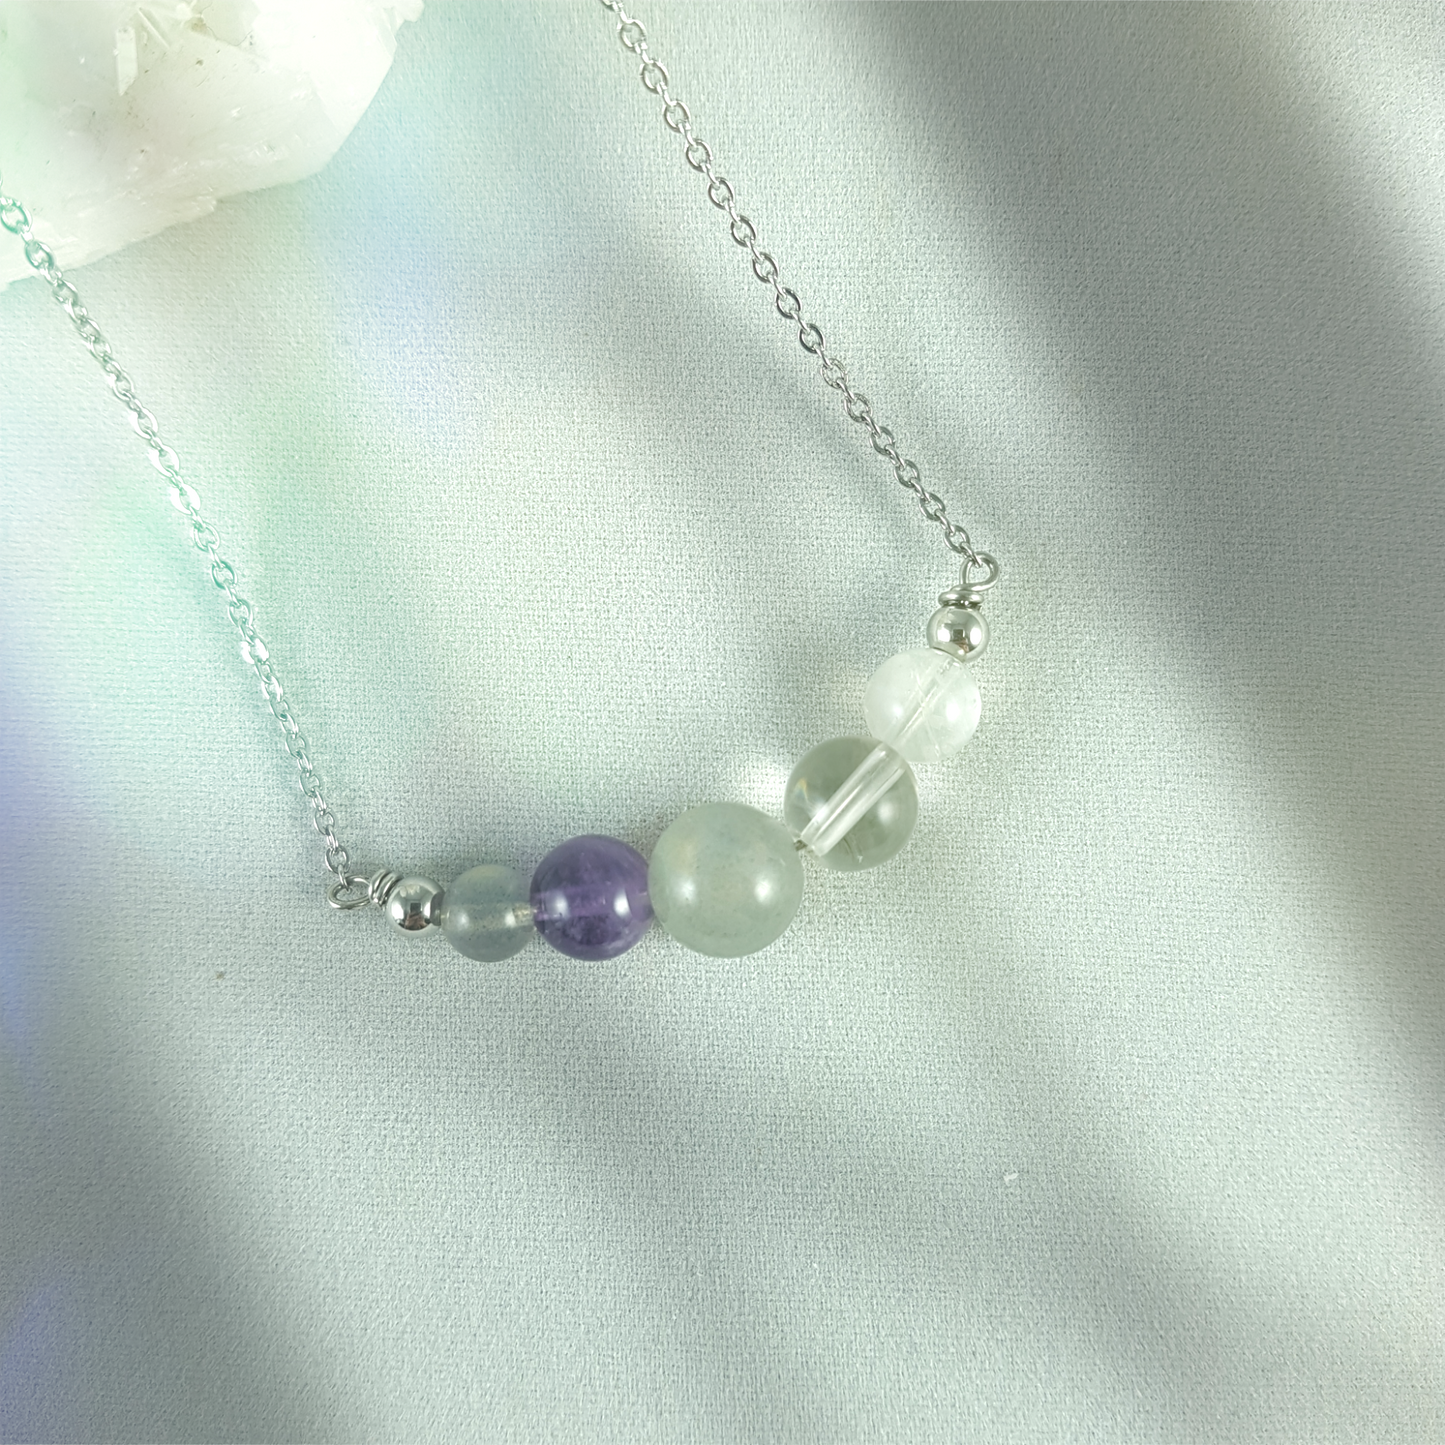 Crown Chakra Five Bead Stainless Steel Necklace